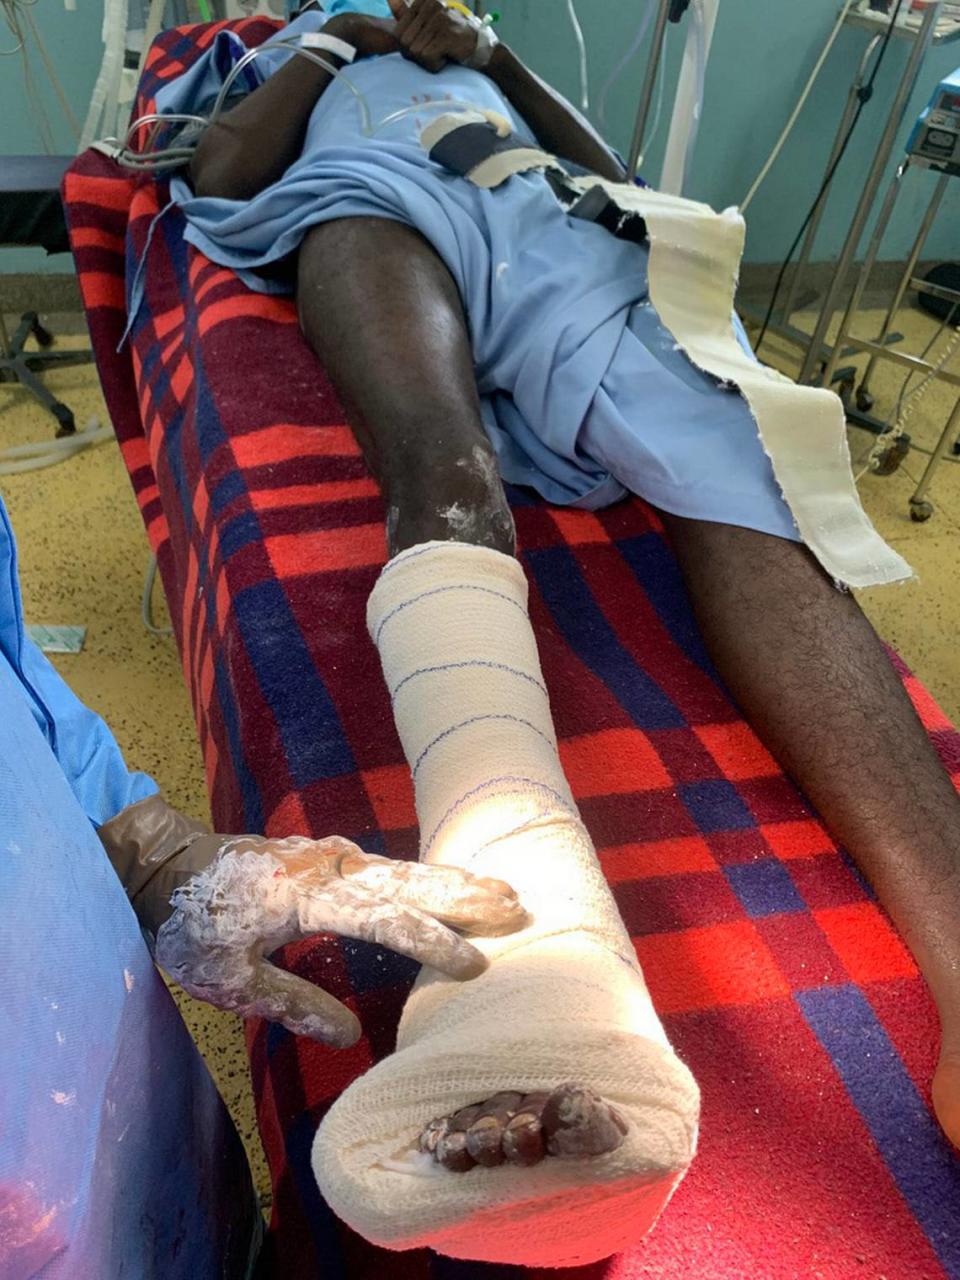 This photo shows a patient with clubfoot after surgery he received in Nairobi, Kenya through the Steps2Walk, Inc. program.